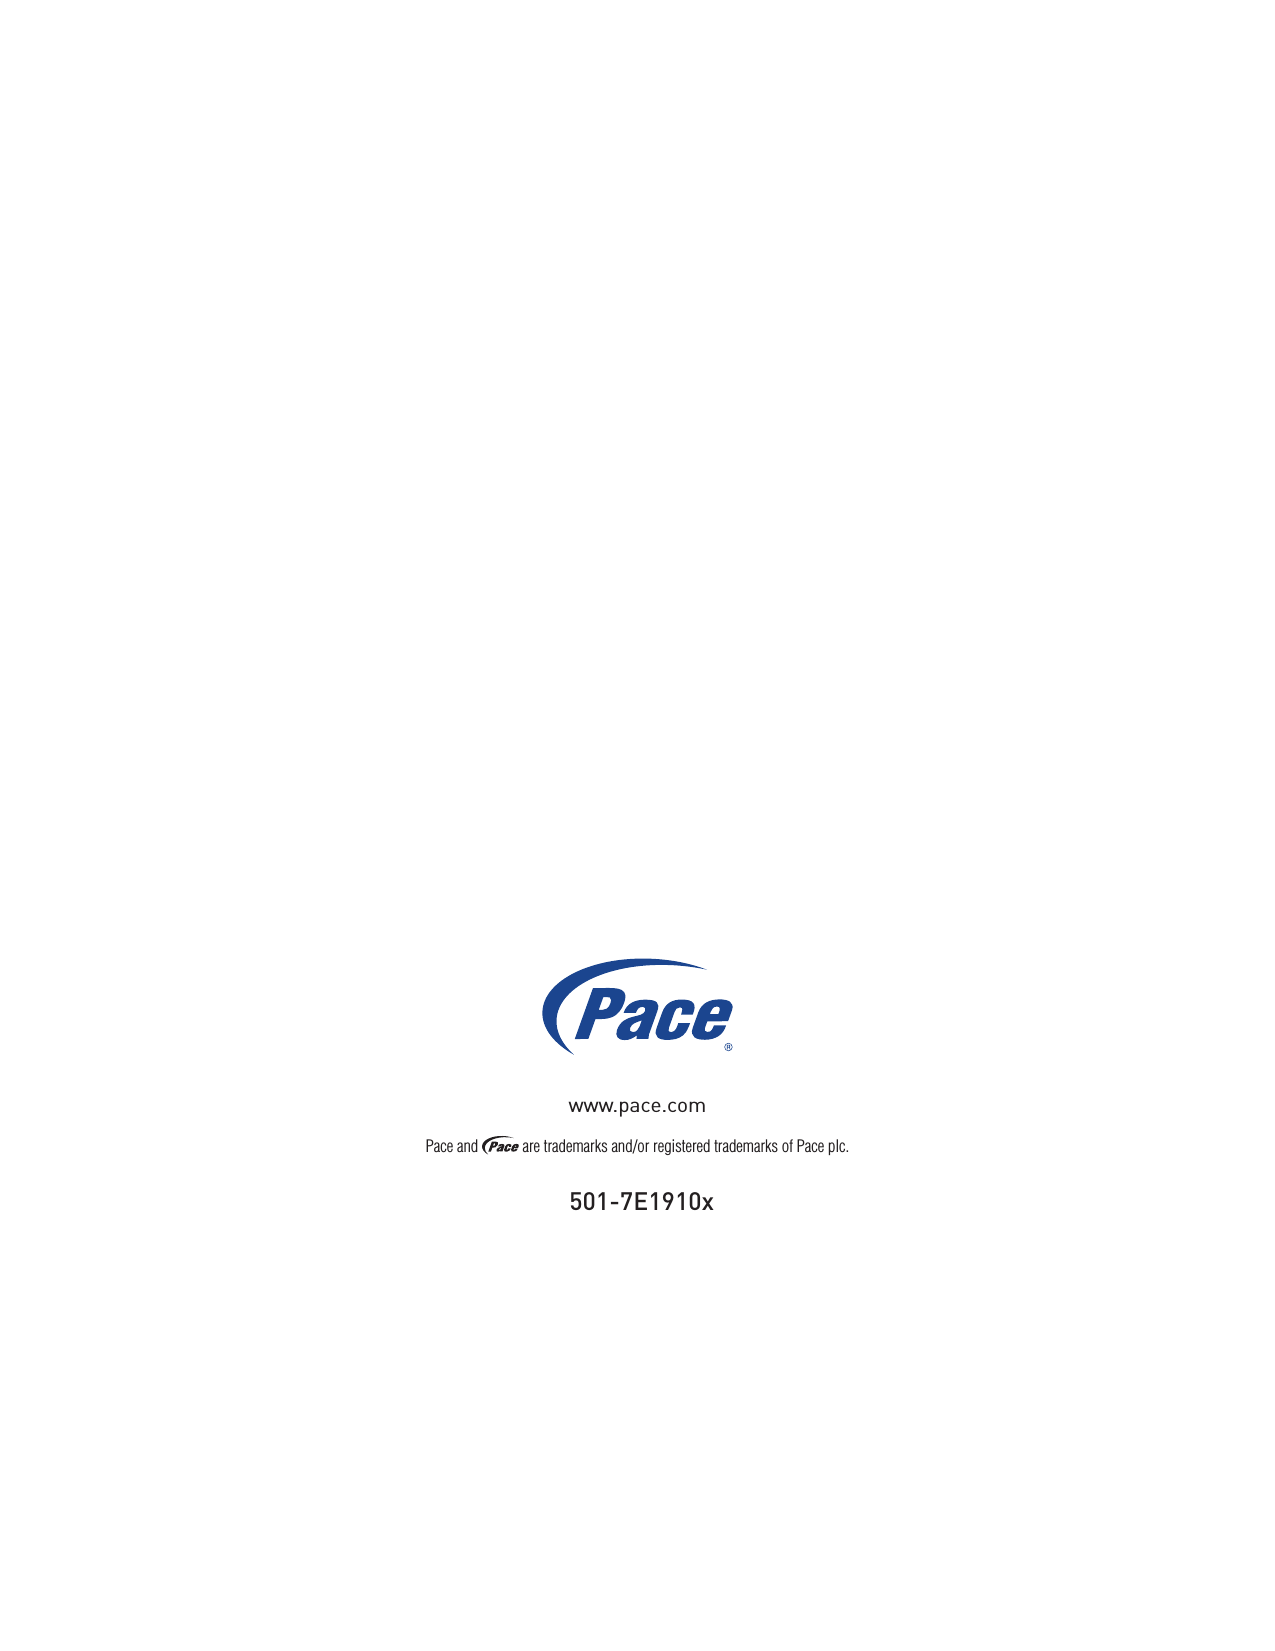 501-7E1910xPace and   are trademarks and/or registered trademarks of Pace plc.www.pace.com